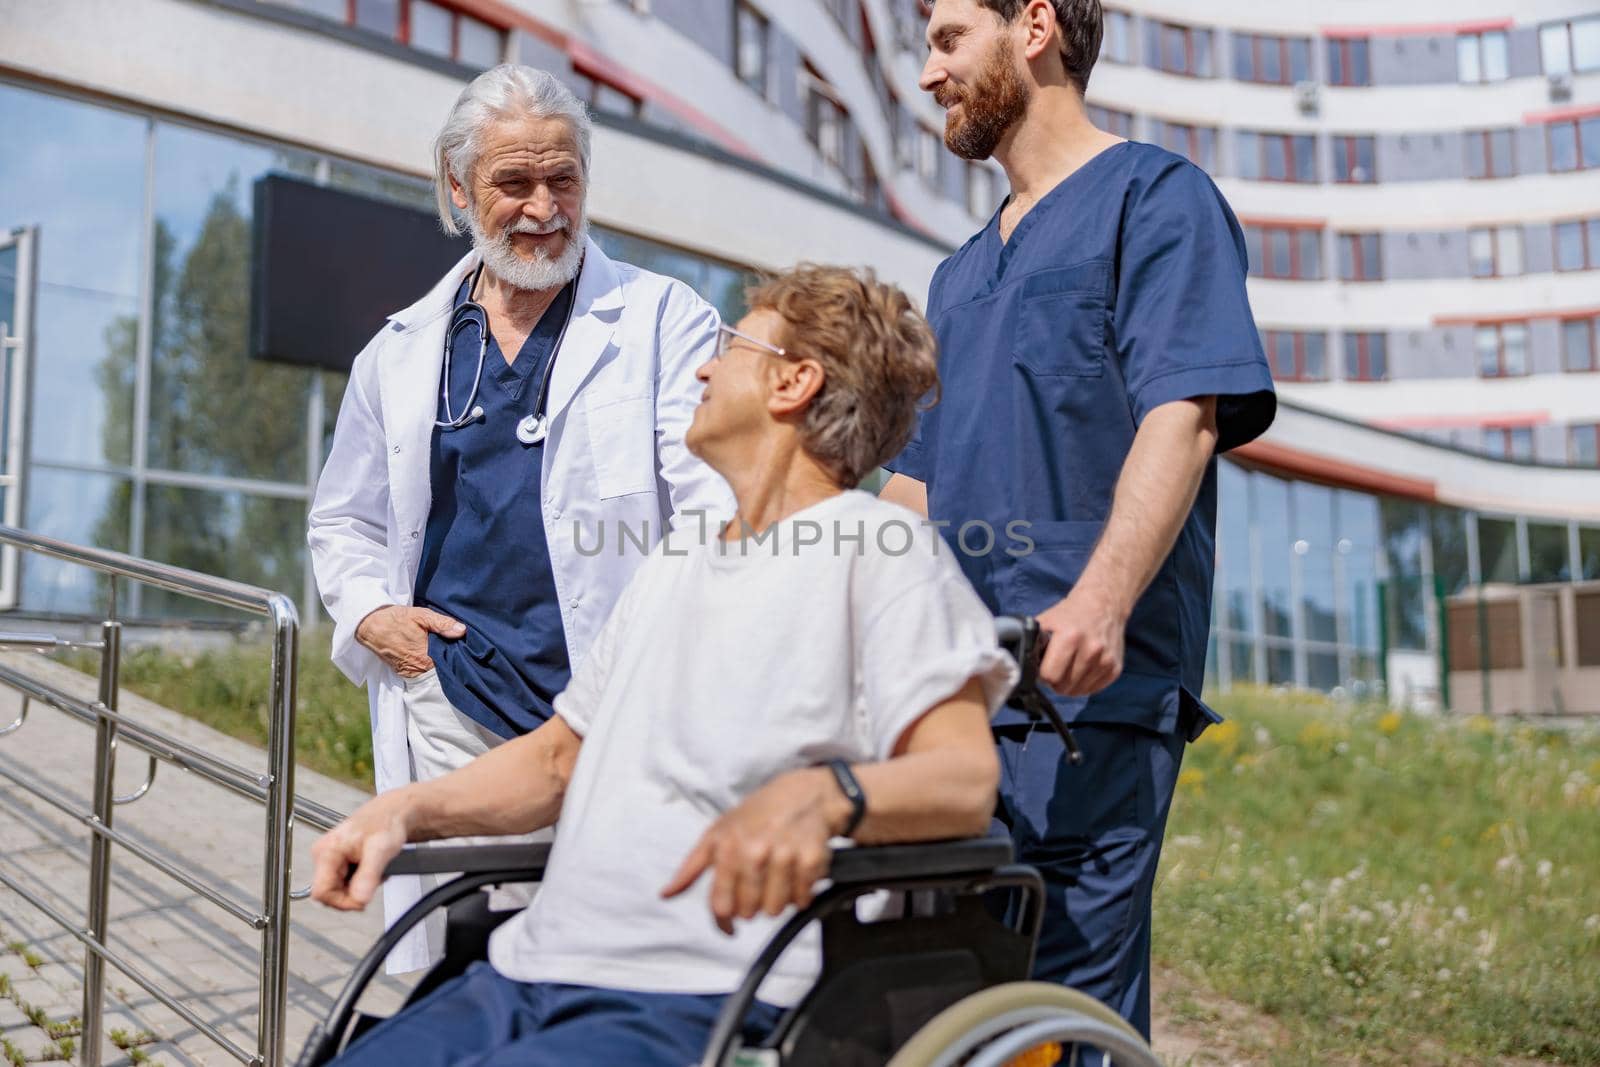 Nurse and doctor talking to patient on wheelchair in hospital yard . Rehabilitation concept.